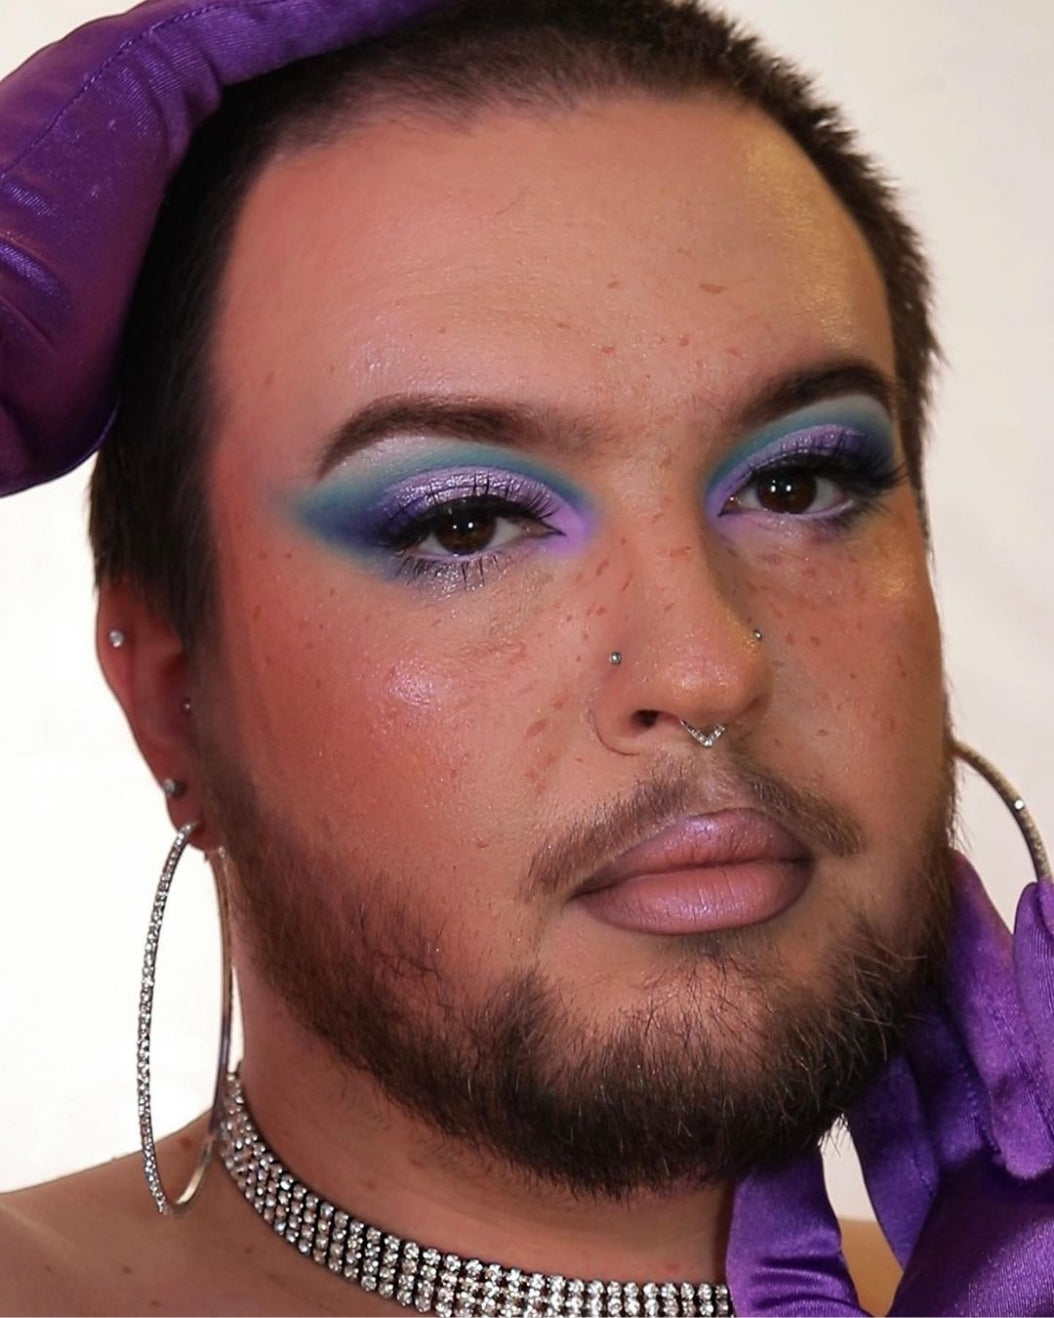 Portrait of a person with blue and purple cut crease eye makeup to use as holiday makeup inspiration